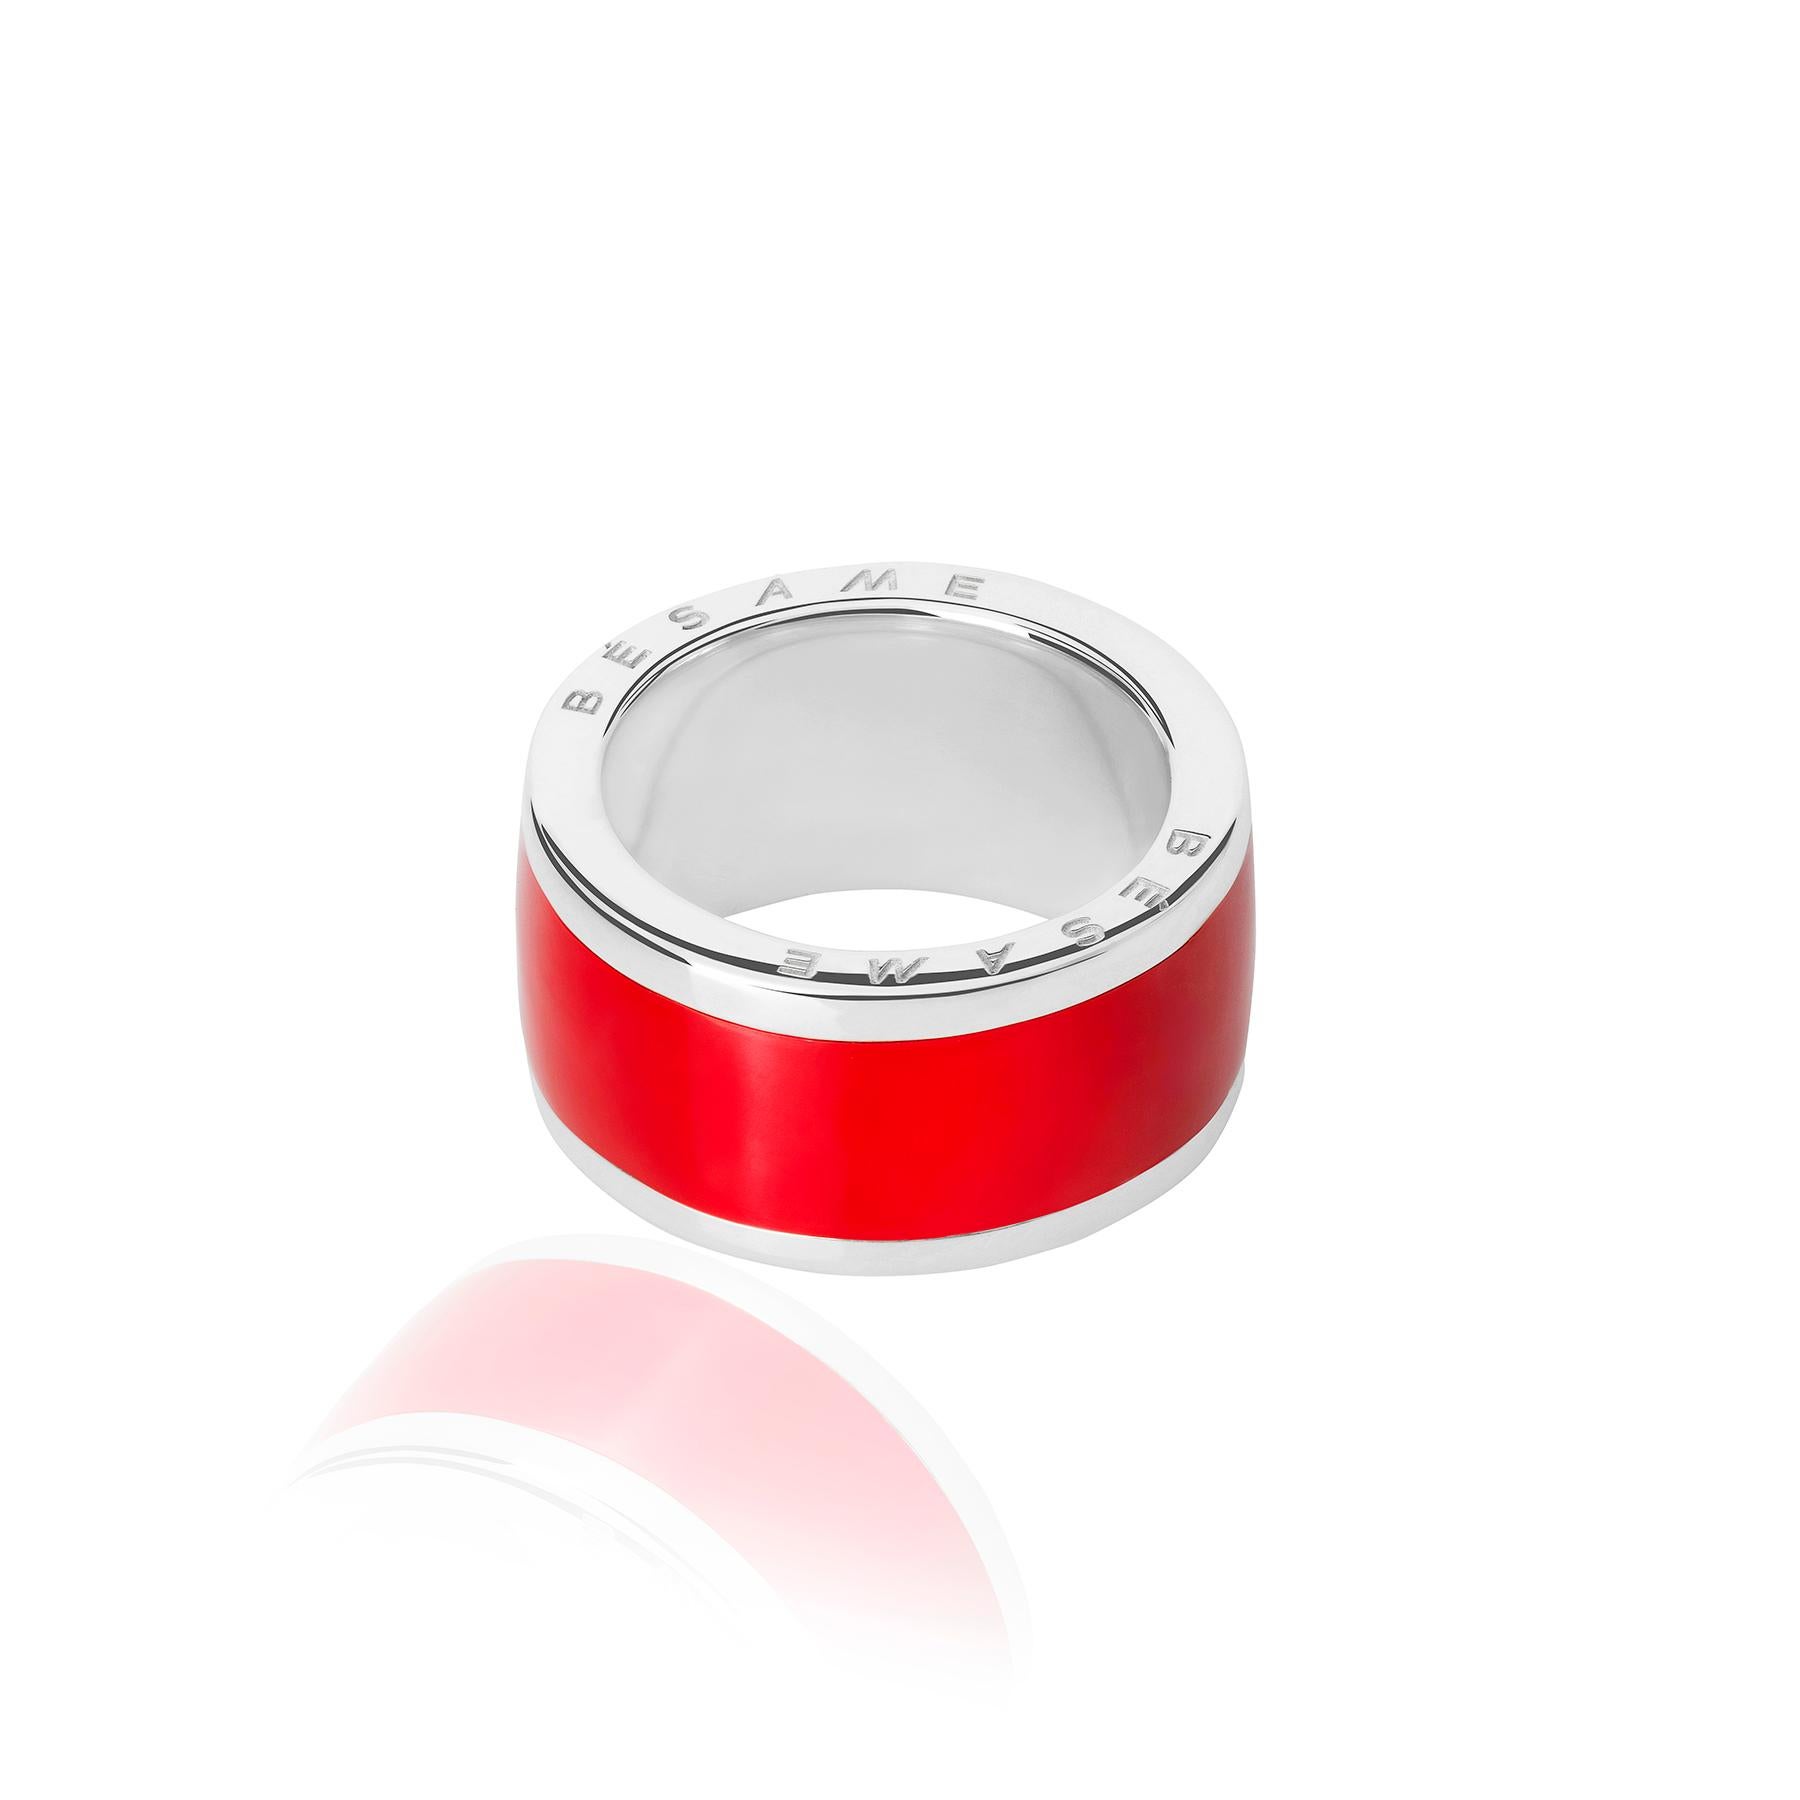 60 mm ring size